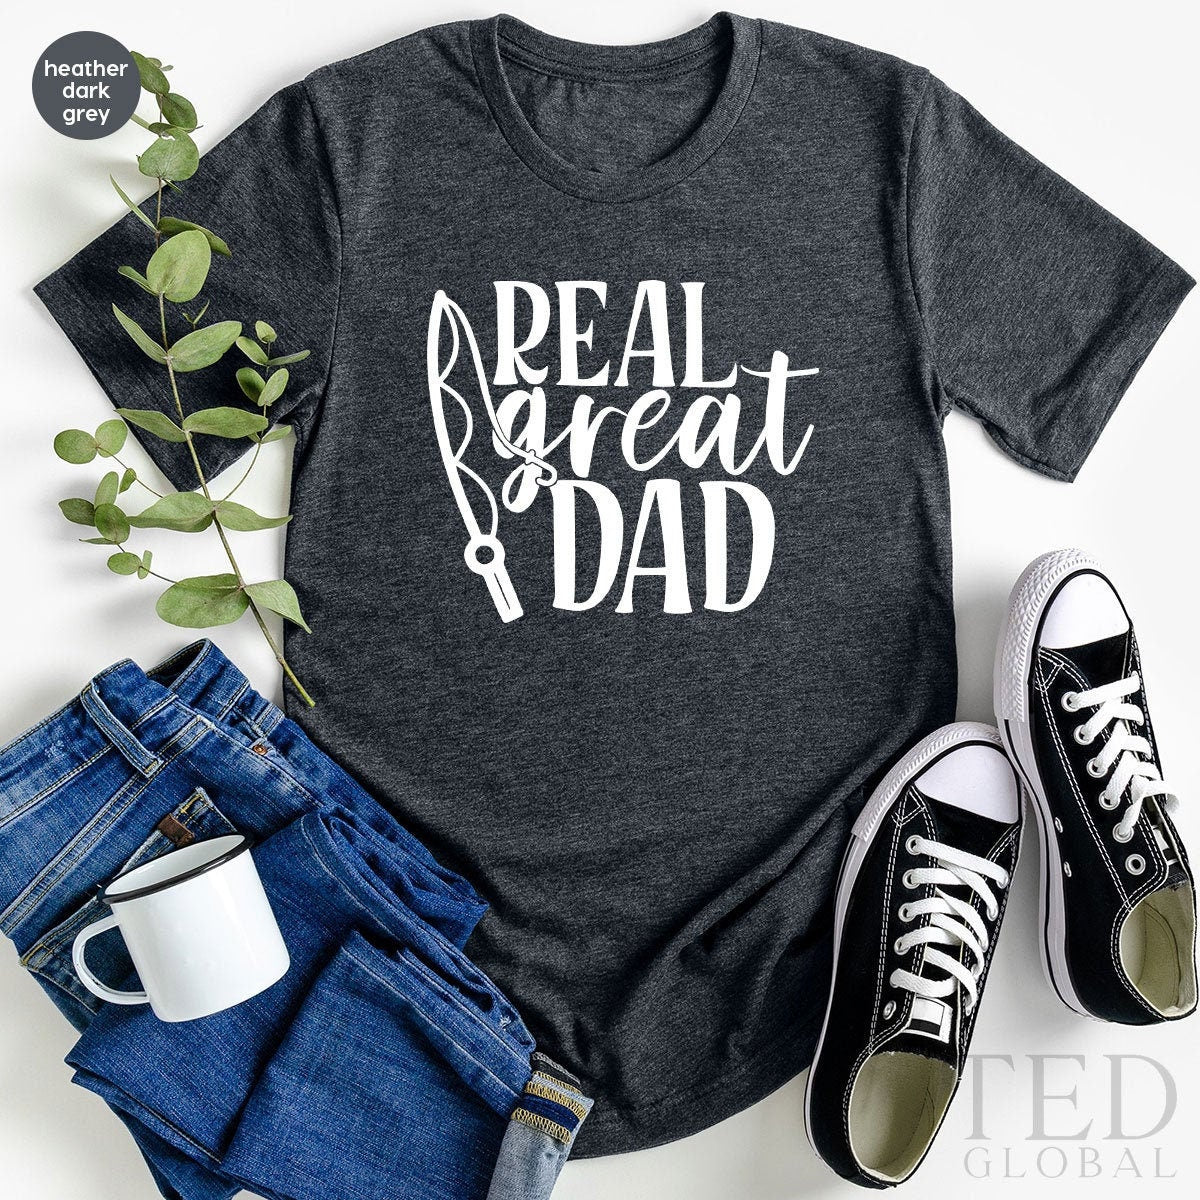 Catch the Perfect Gift: Funny Fishing Shirt for Dad